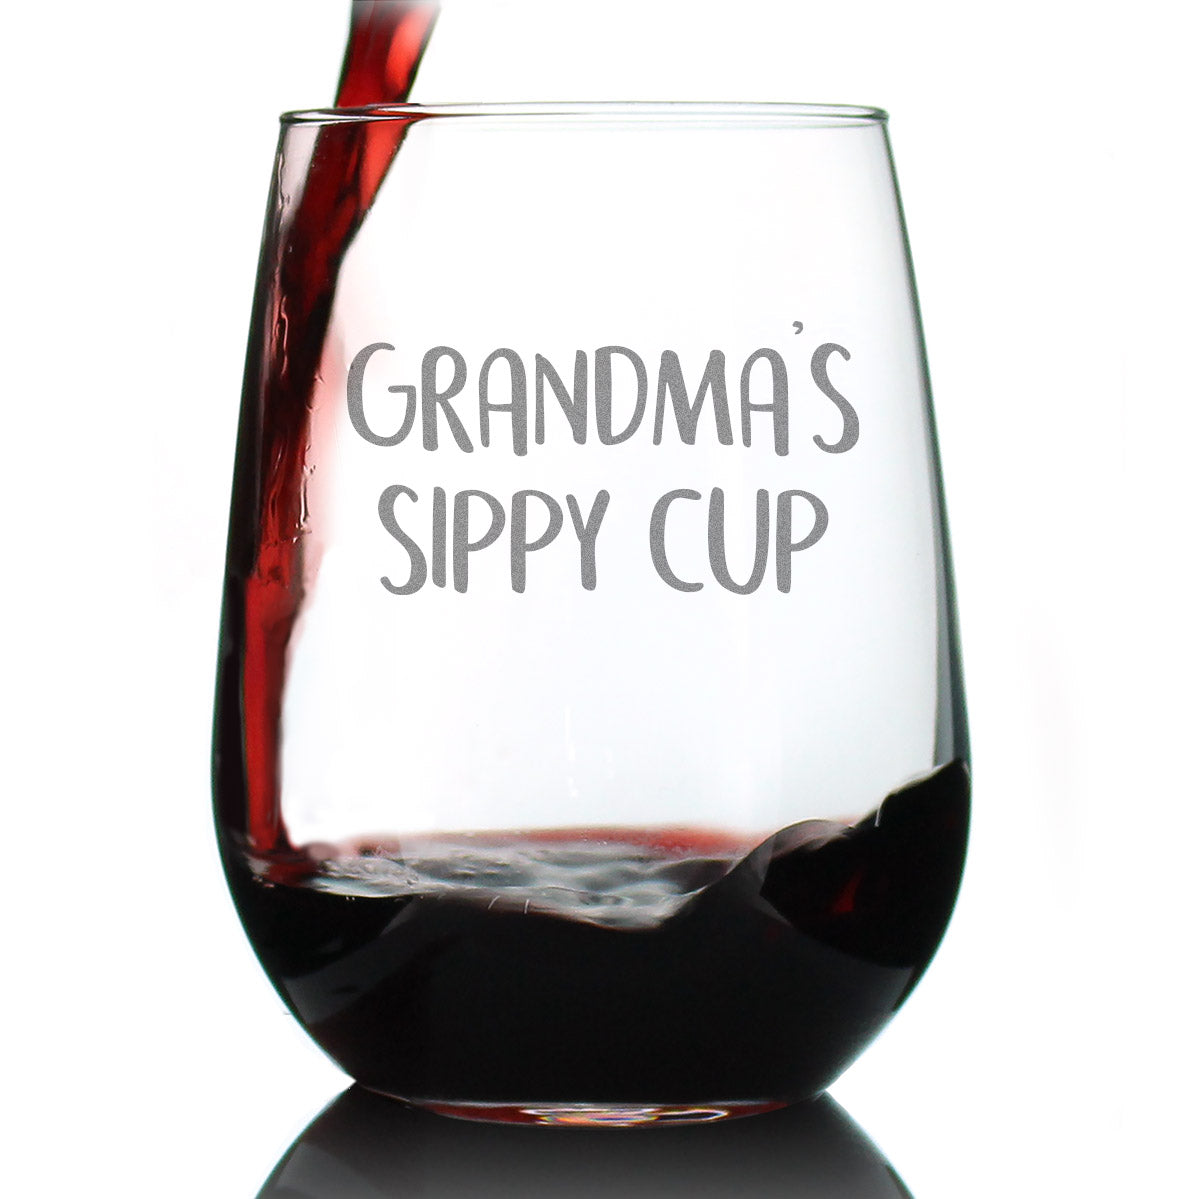 Grandma's Sippy Cup - Stemless Wine Glass Gift for Grandmothers - Cute Birthday Glasses - Large 17 Oz